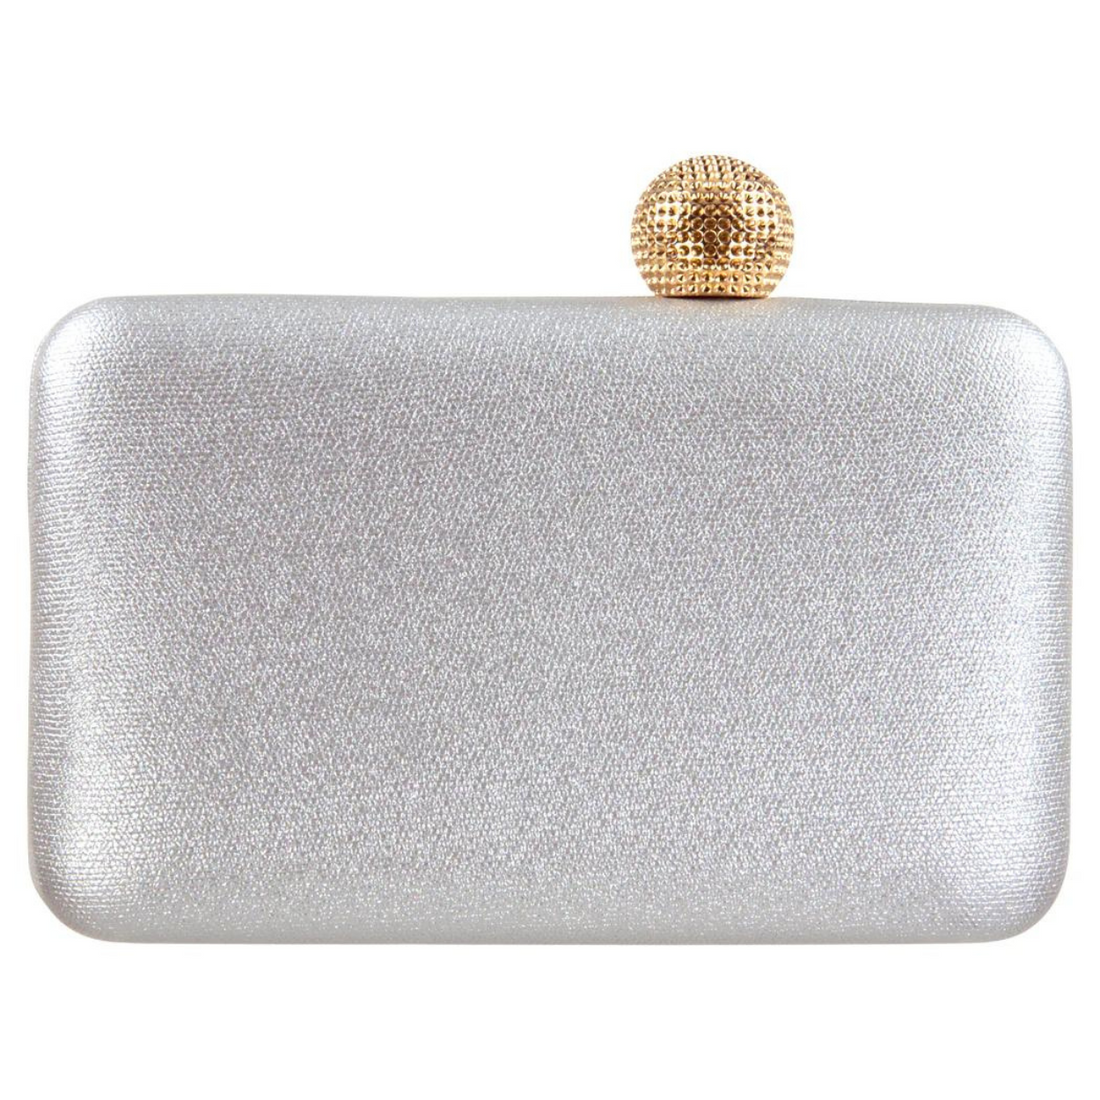 Box Clutch with Ball Clasp